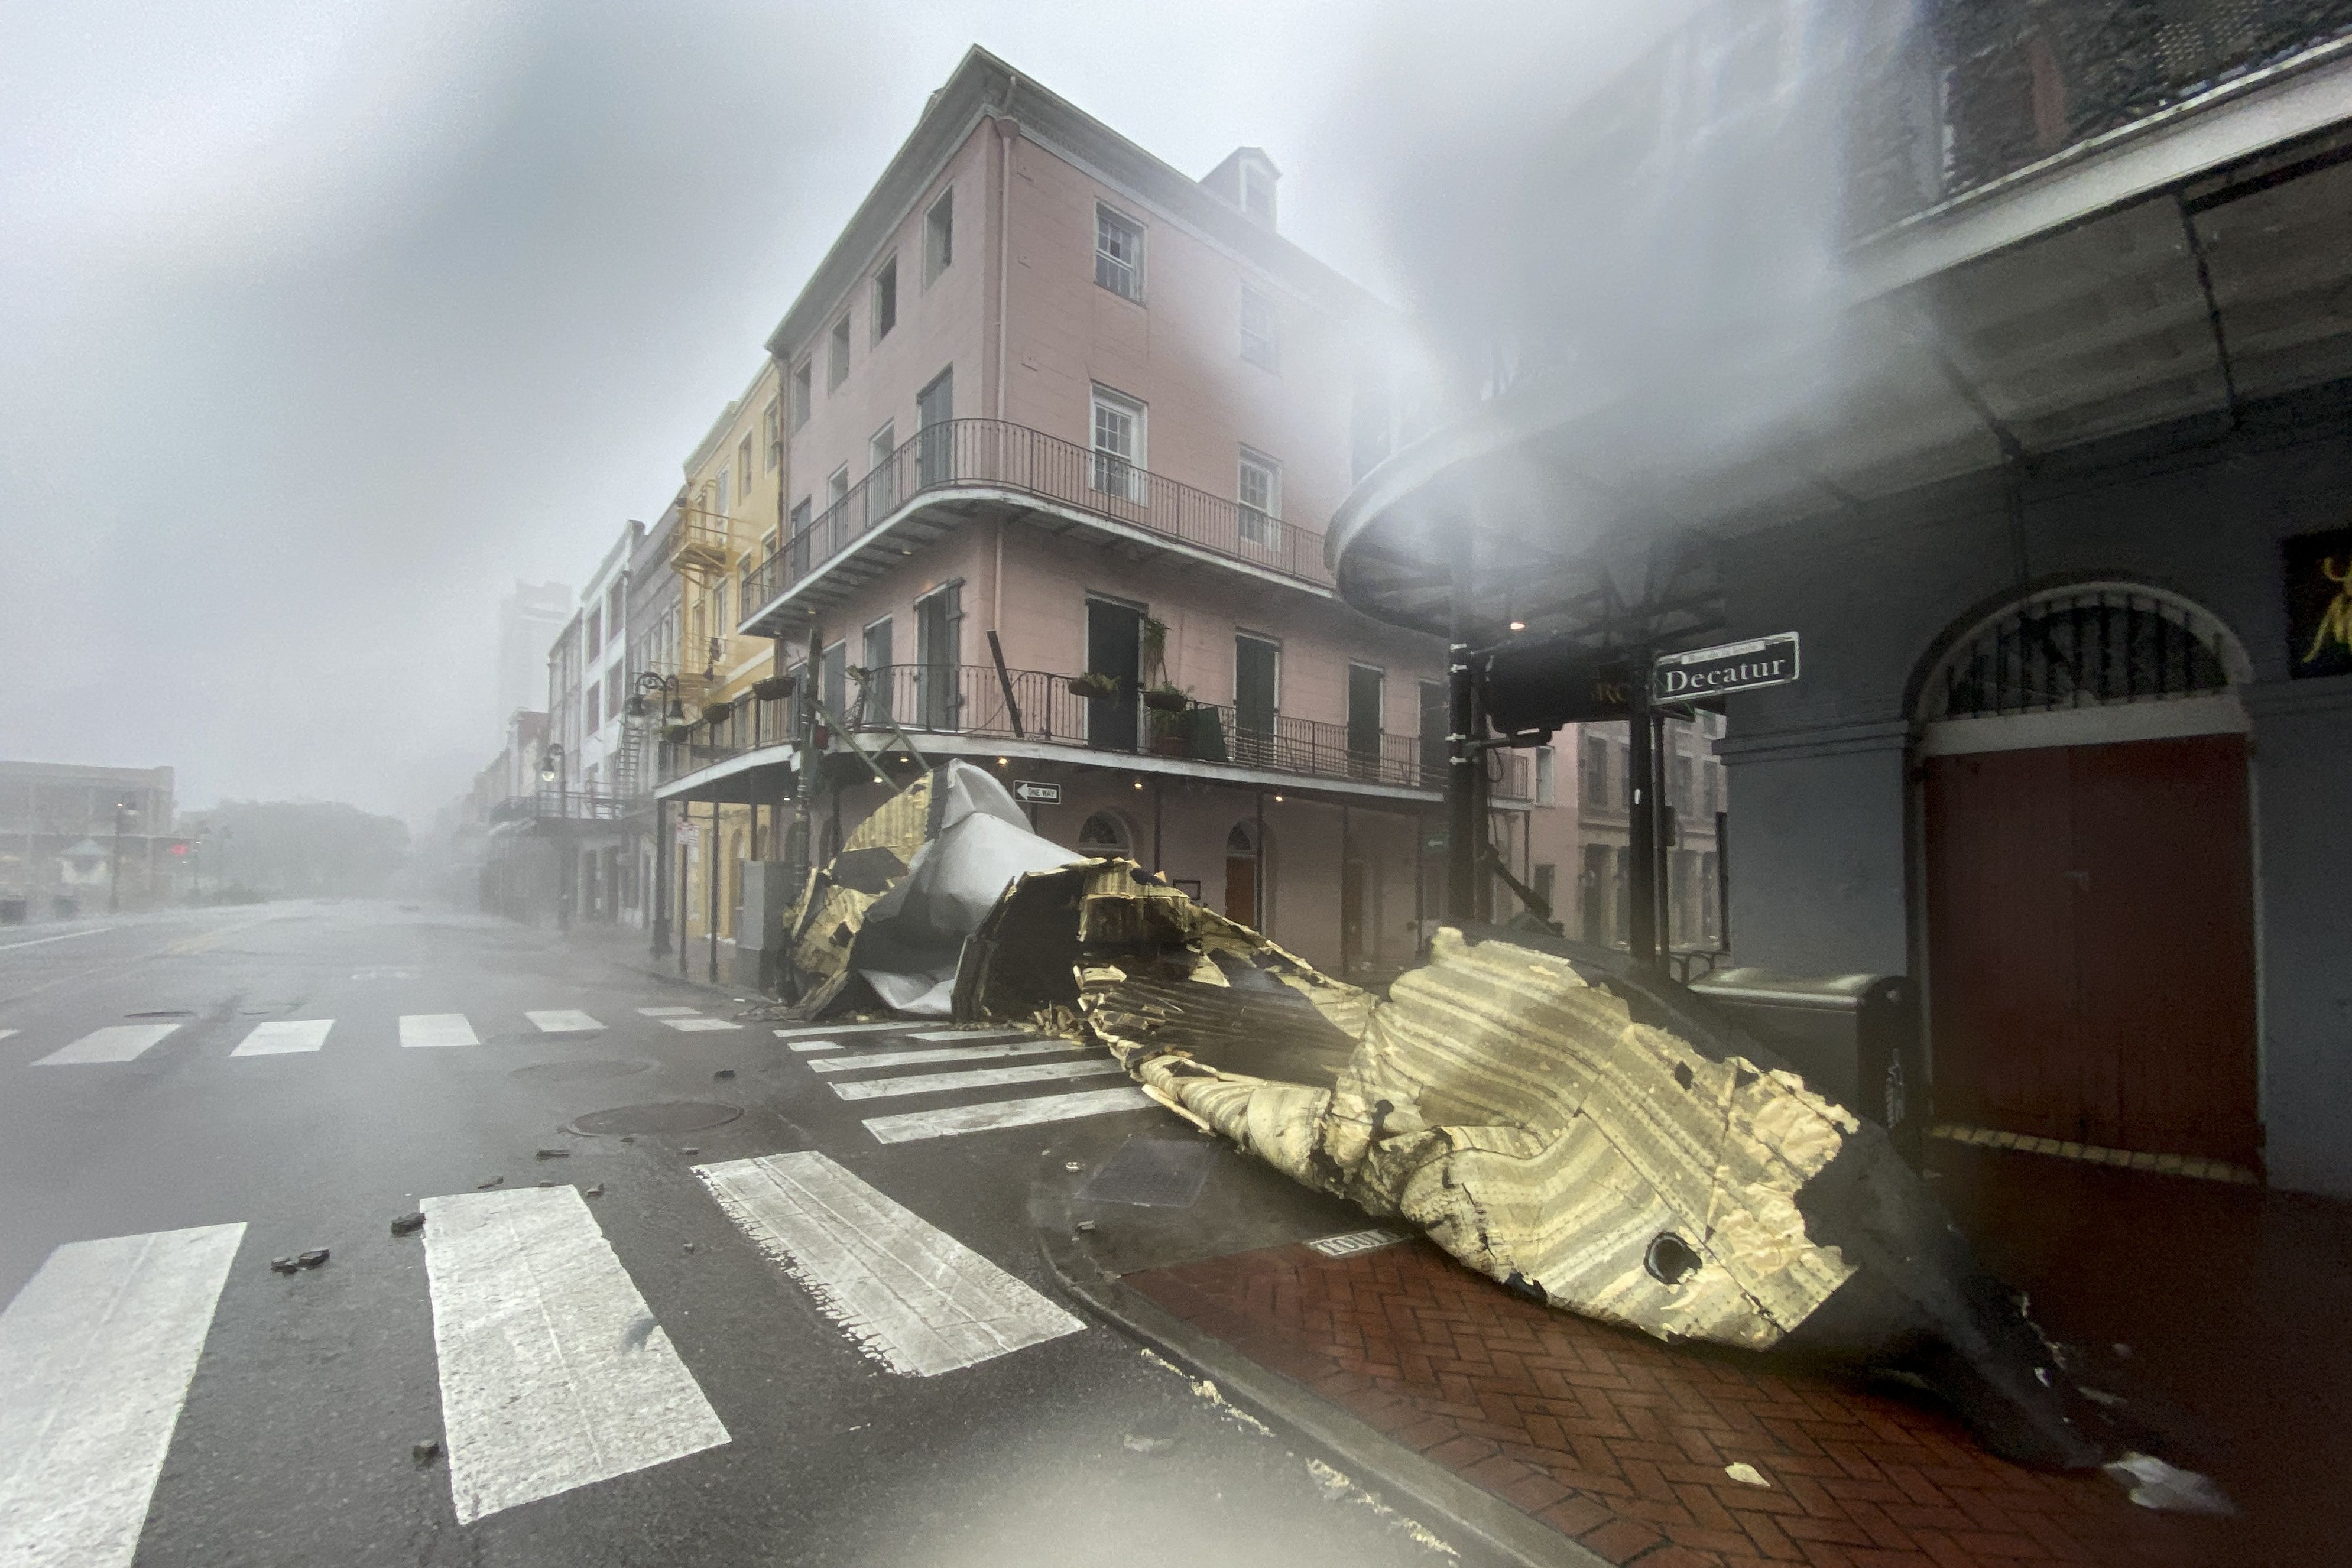 A section of a building's roof is seen after being blown off during rain and winds in the French Quarter of New Orleans, Louisiana. Photo: Patrick Fallon/AFP via Getty Images